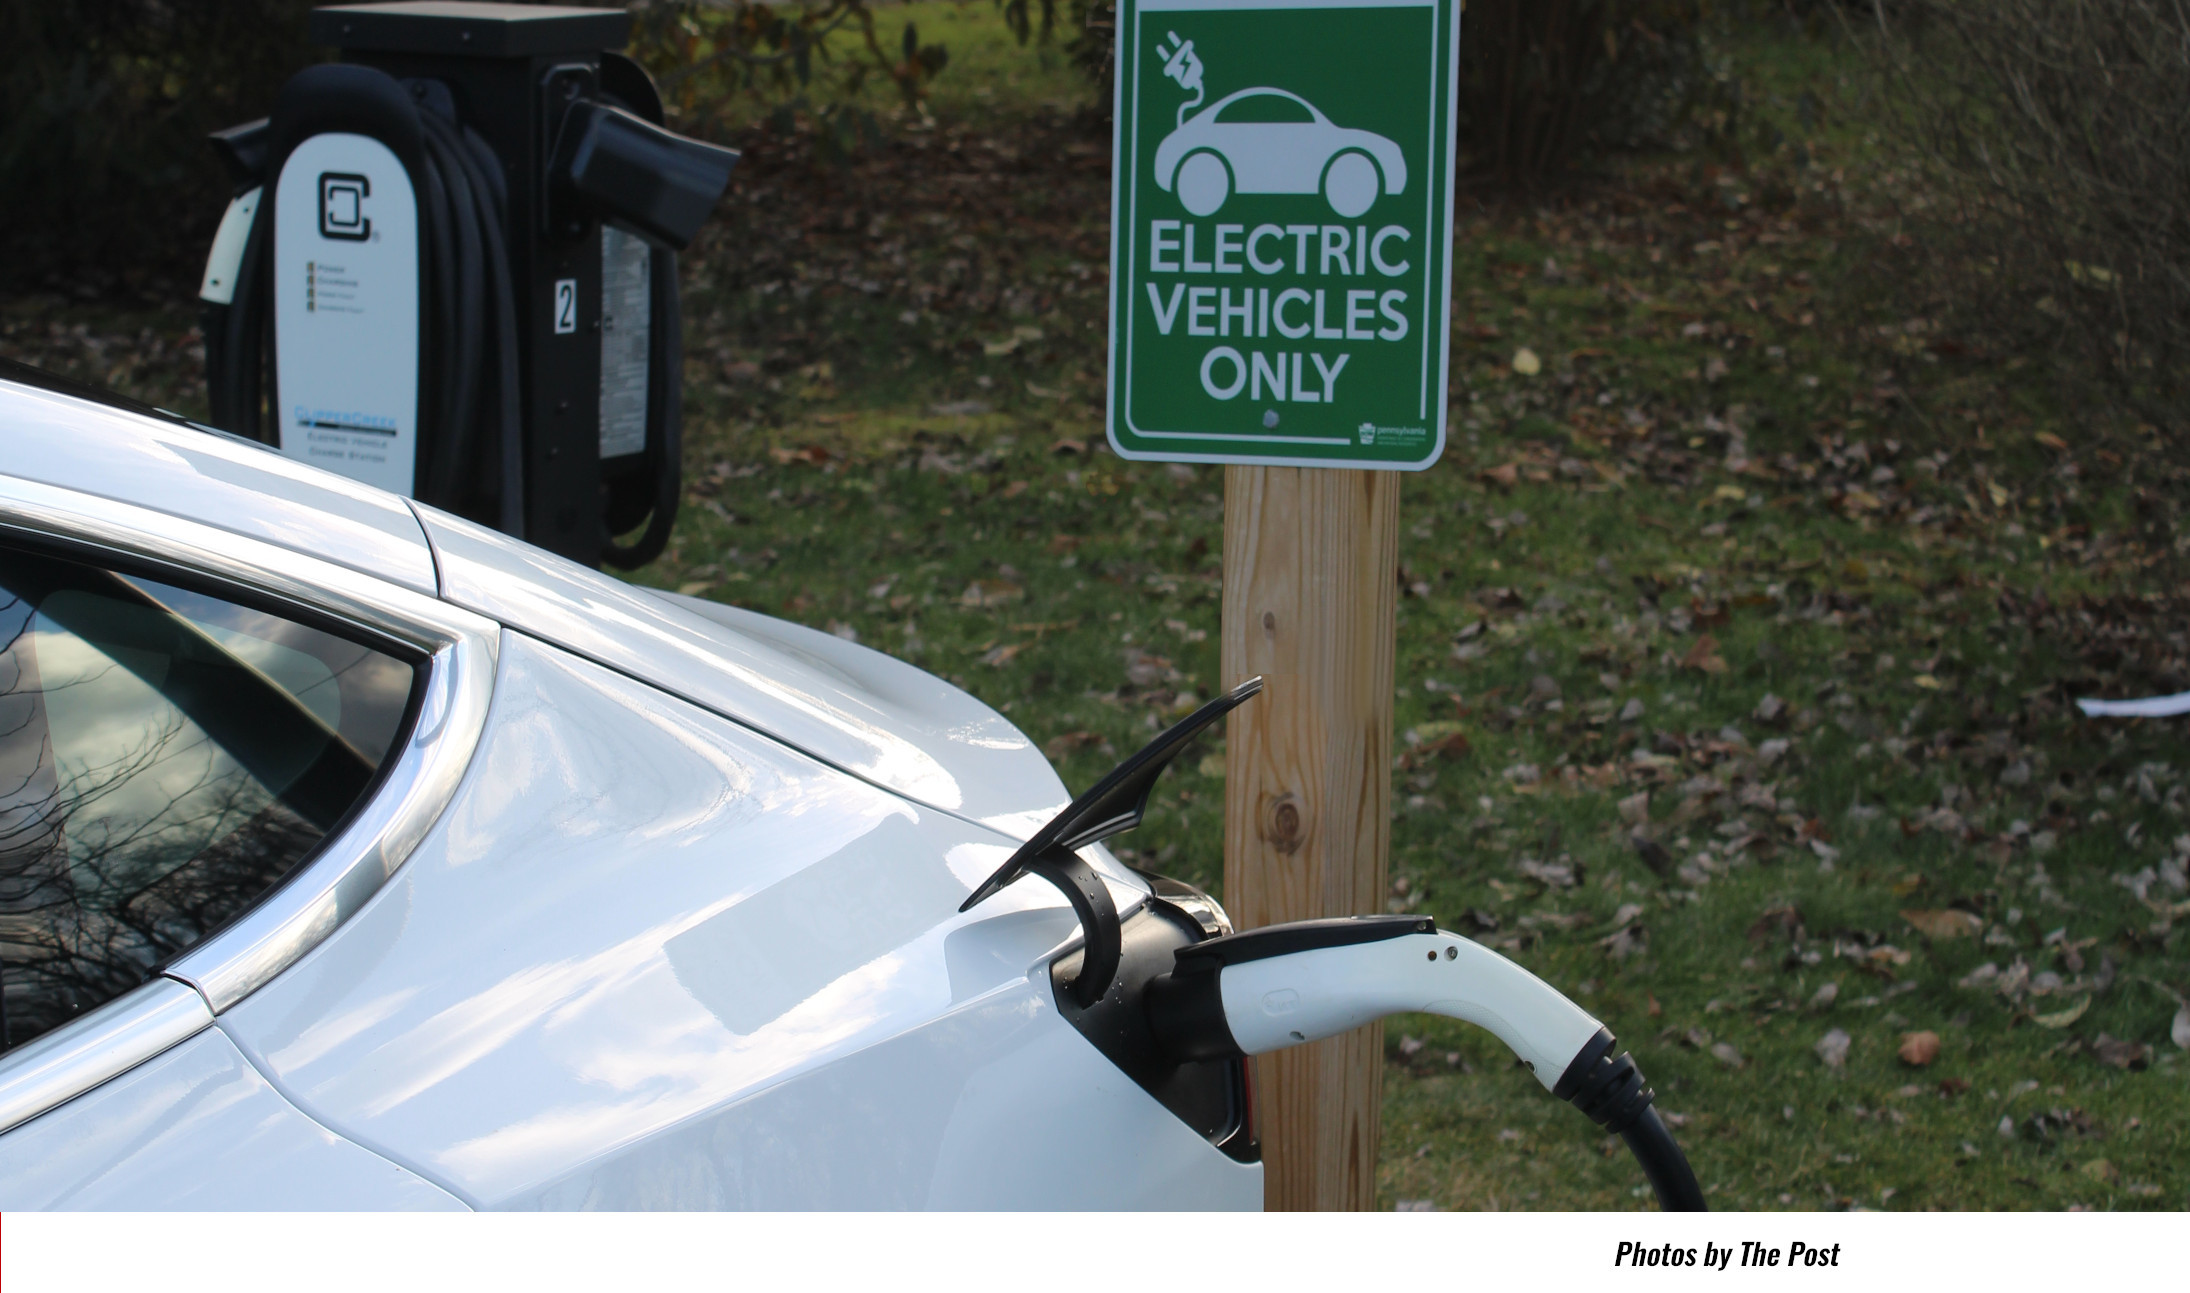 PA Obtains $5 Million to Fix Electric Vehicle Chargers